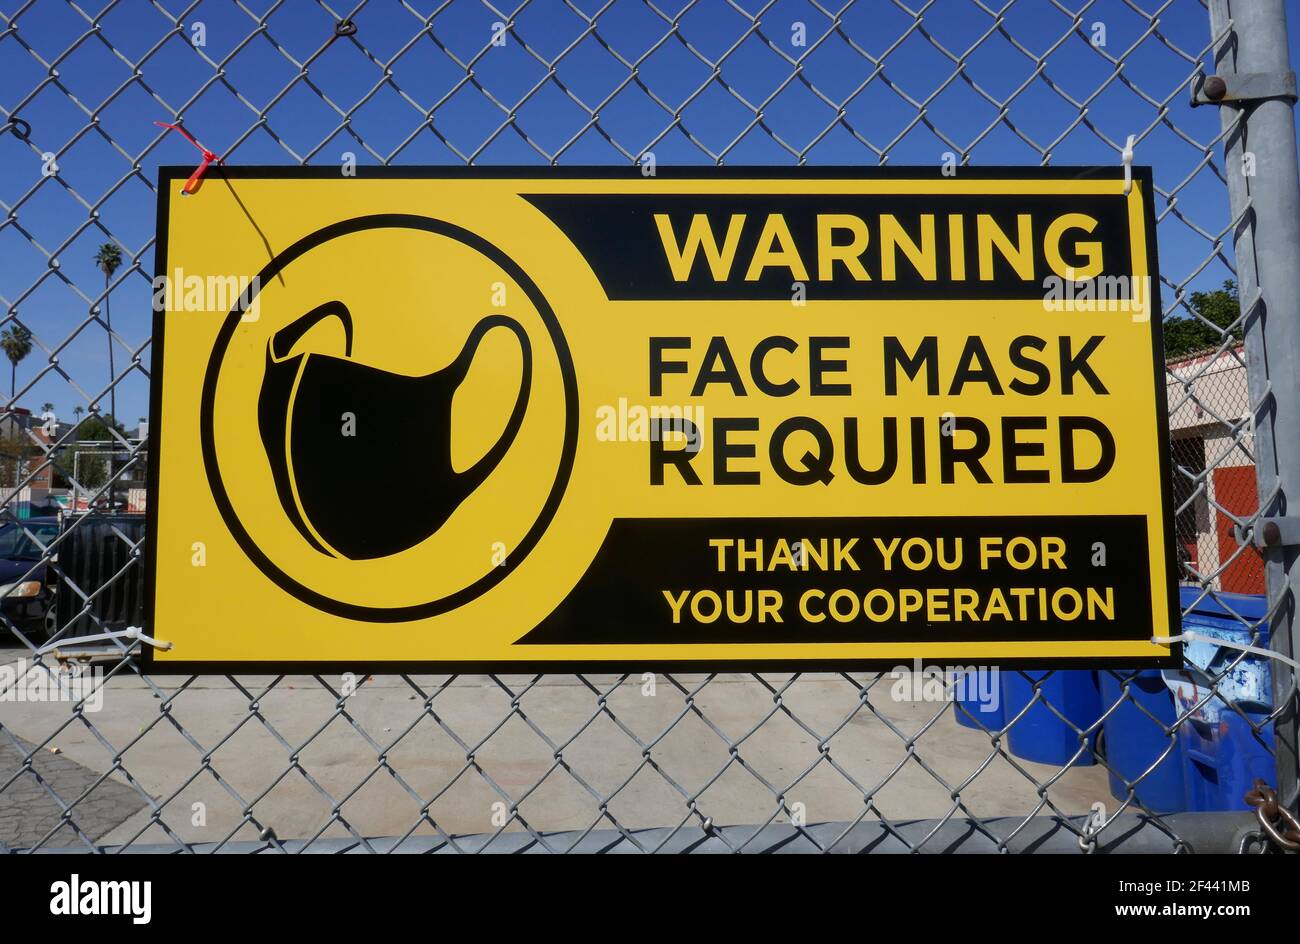 Los Angeles, California, USA 18th March 2021 A general view of atmosphere of Warning Face Mask Required Sign in Los Angeles, California, USA. Photo by Barry King/Alamy Stock Photo Stock Photo